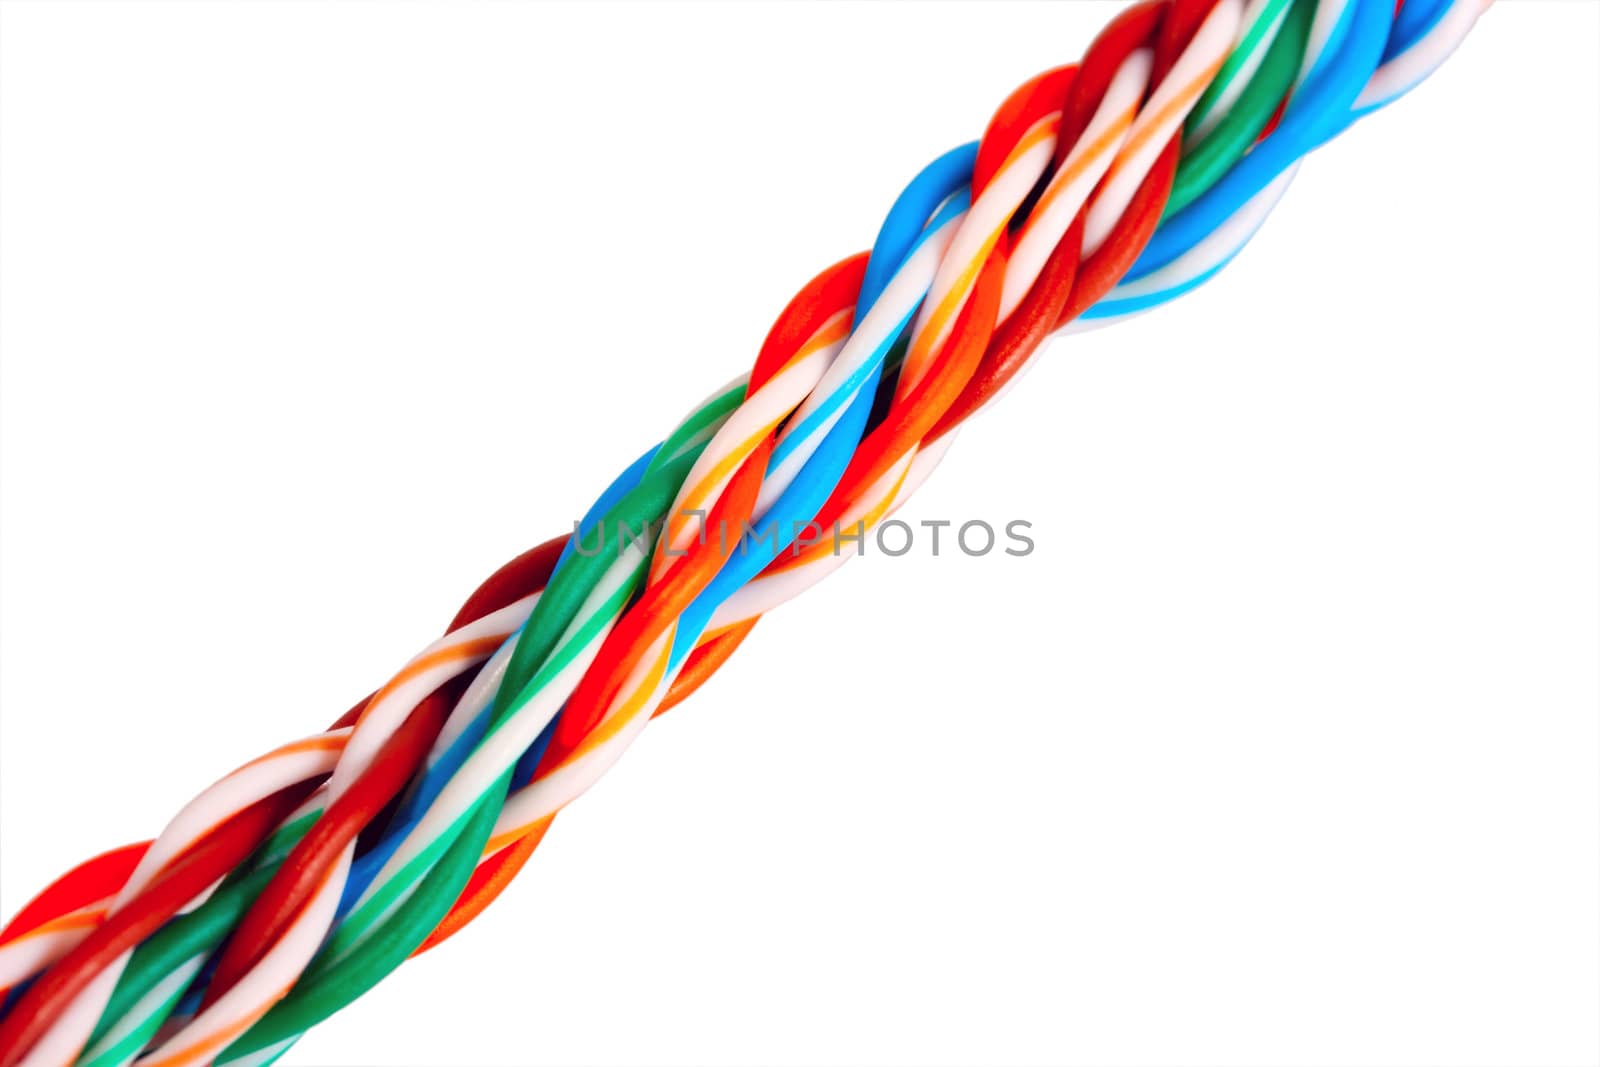 cable internet multicolored isolated on white background